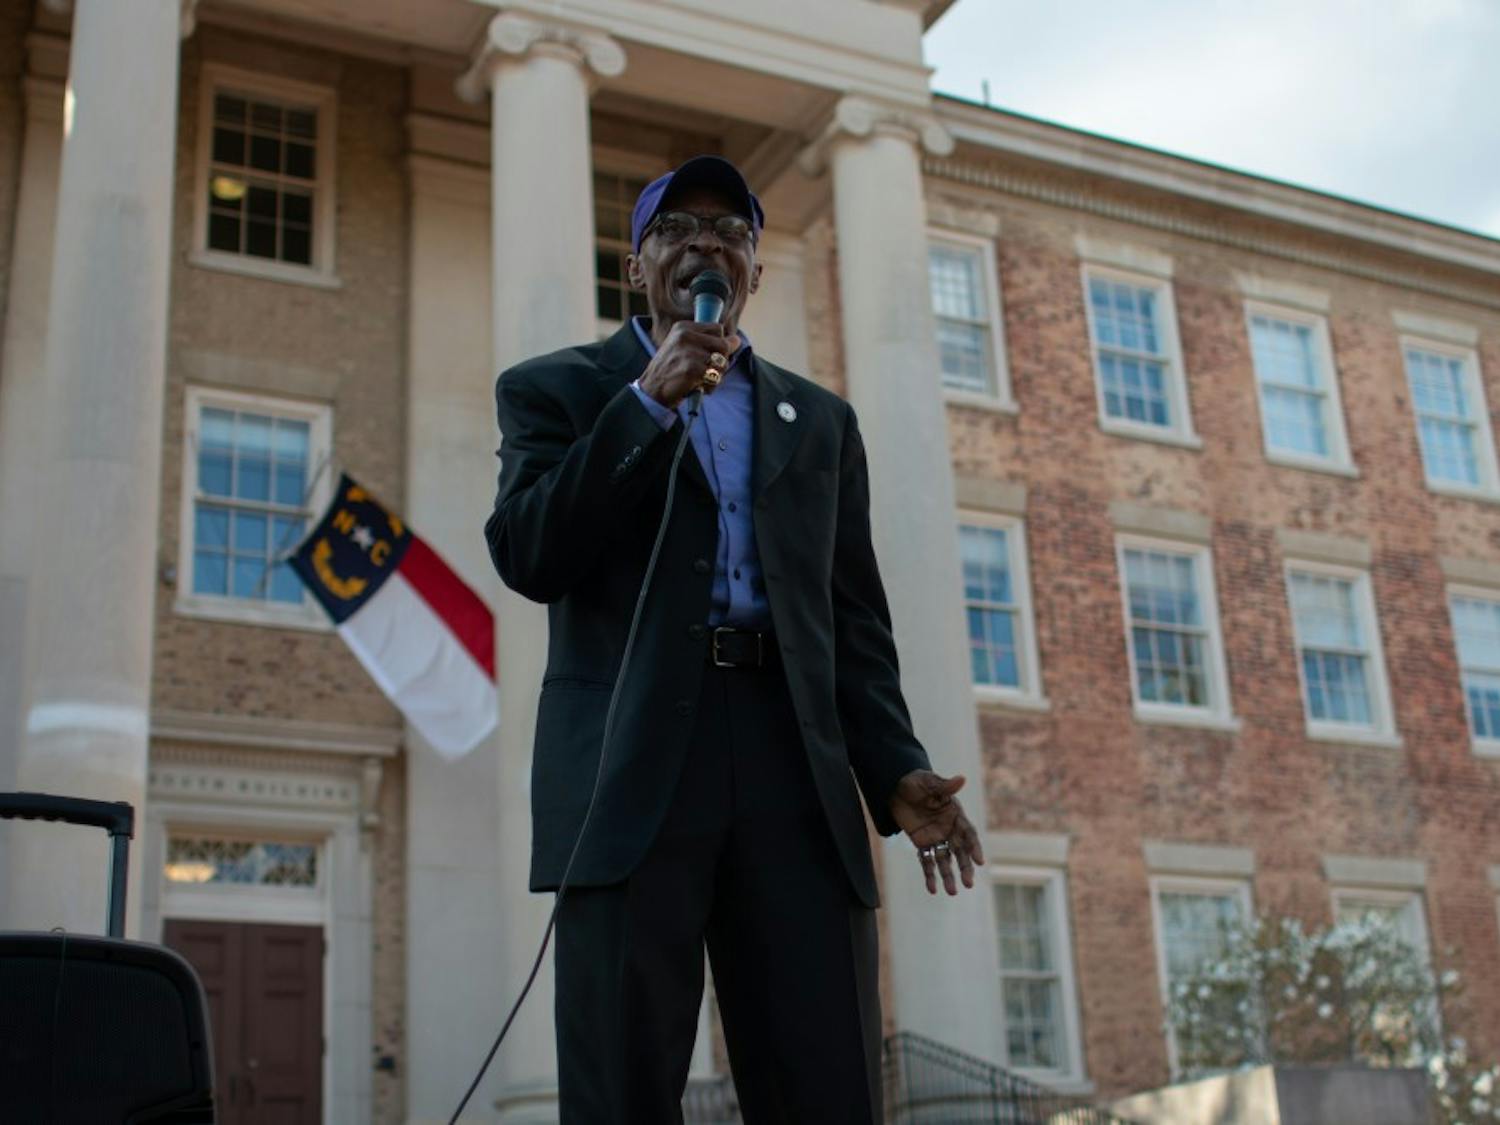 Rev. Dr. T. Anthony Spearman, 67, of Greensboro, addresses the crowd at an NAACP gathering in front of South Building on Friday, March 22, 2019. The NAACP called the demonstration to condemn the actions of UNC and UNC Police in response to an incident last week when a Confederate group brought guns to campus and were not arrested.